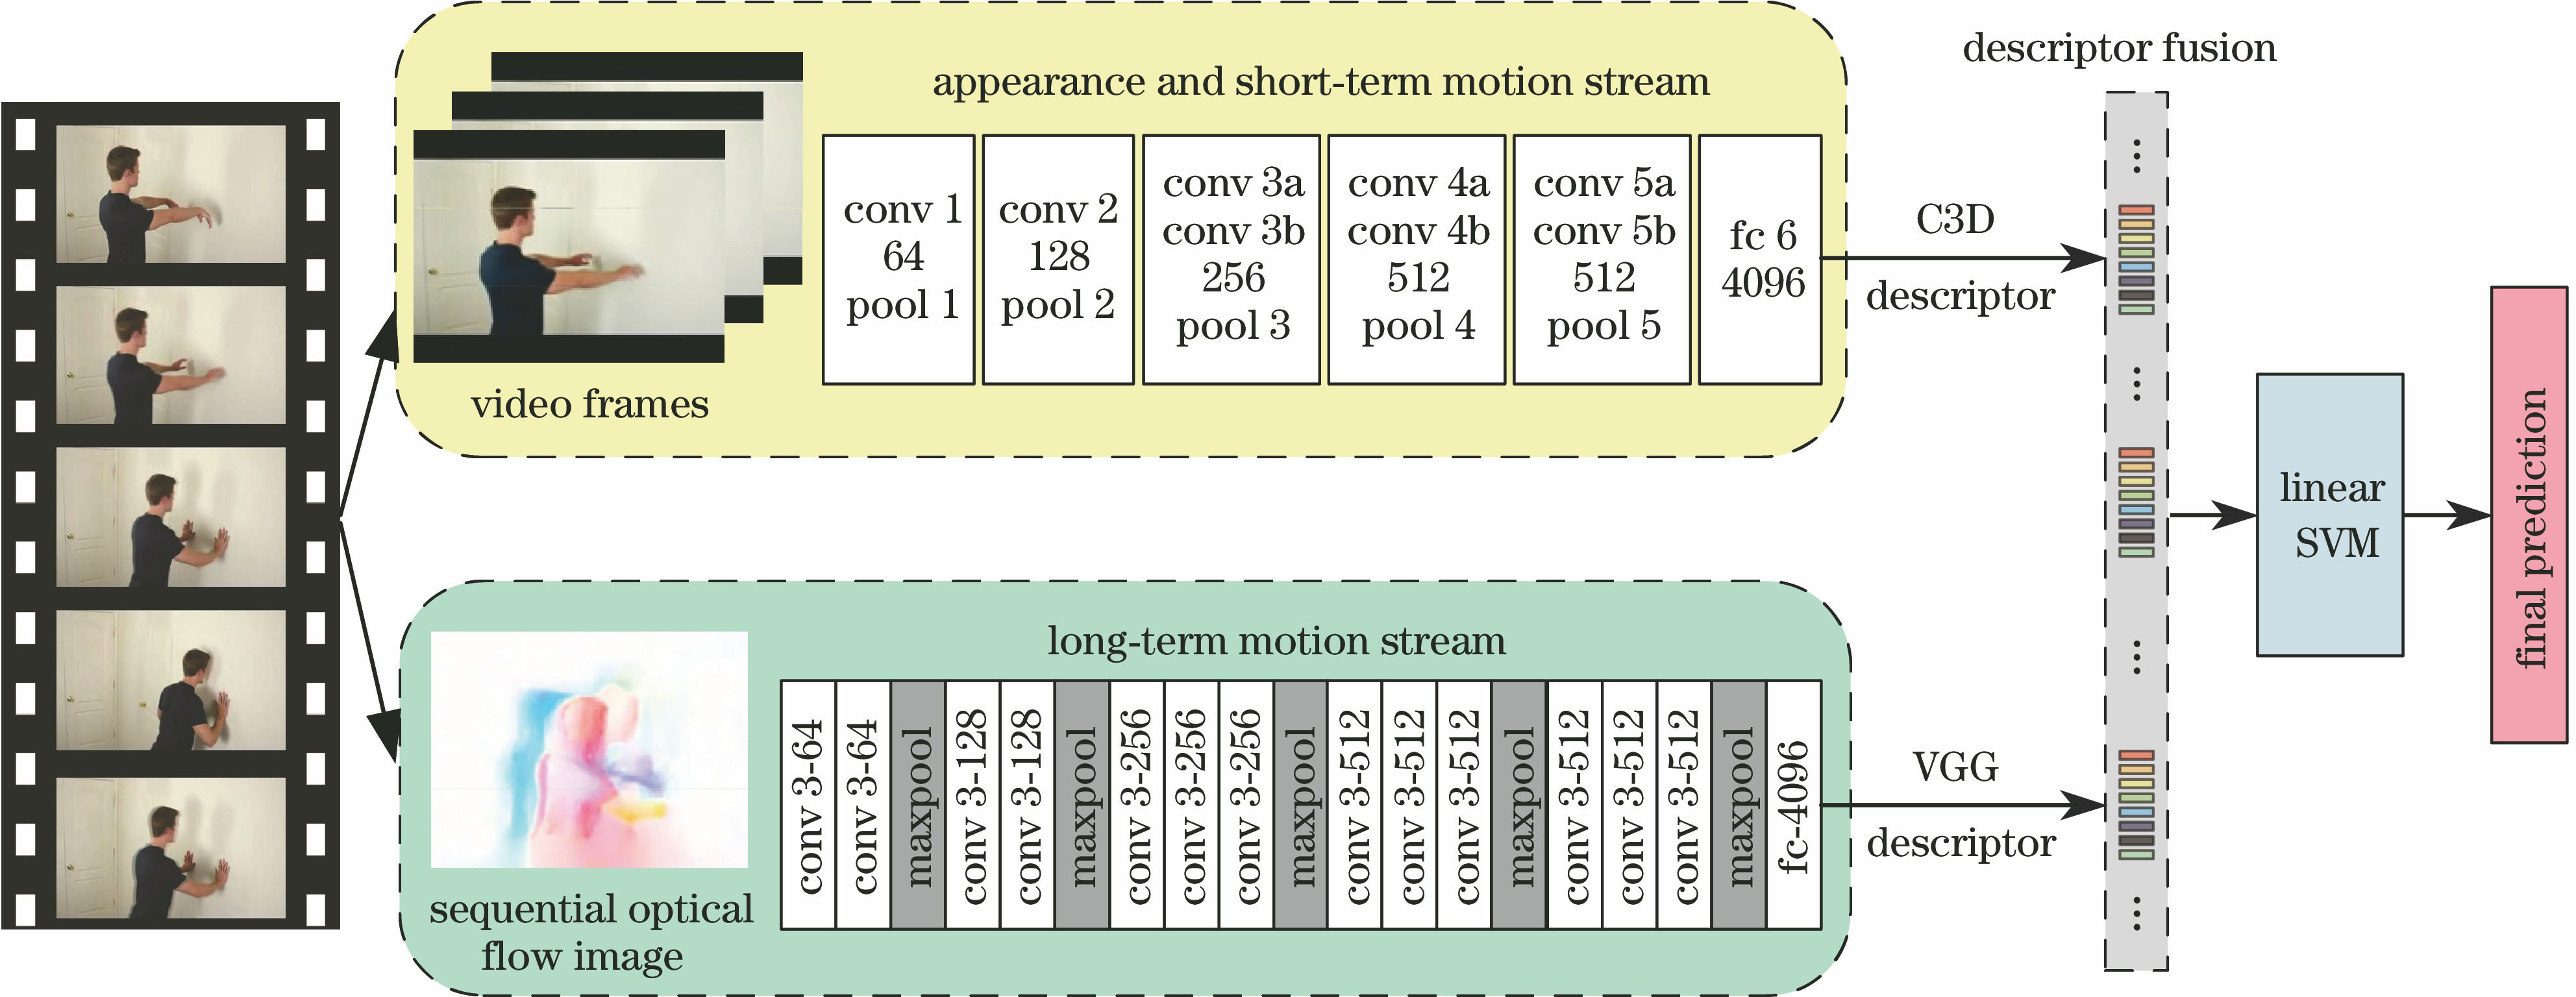 Double-stream network framework fusing appearance information and motion information